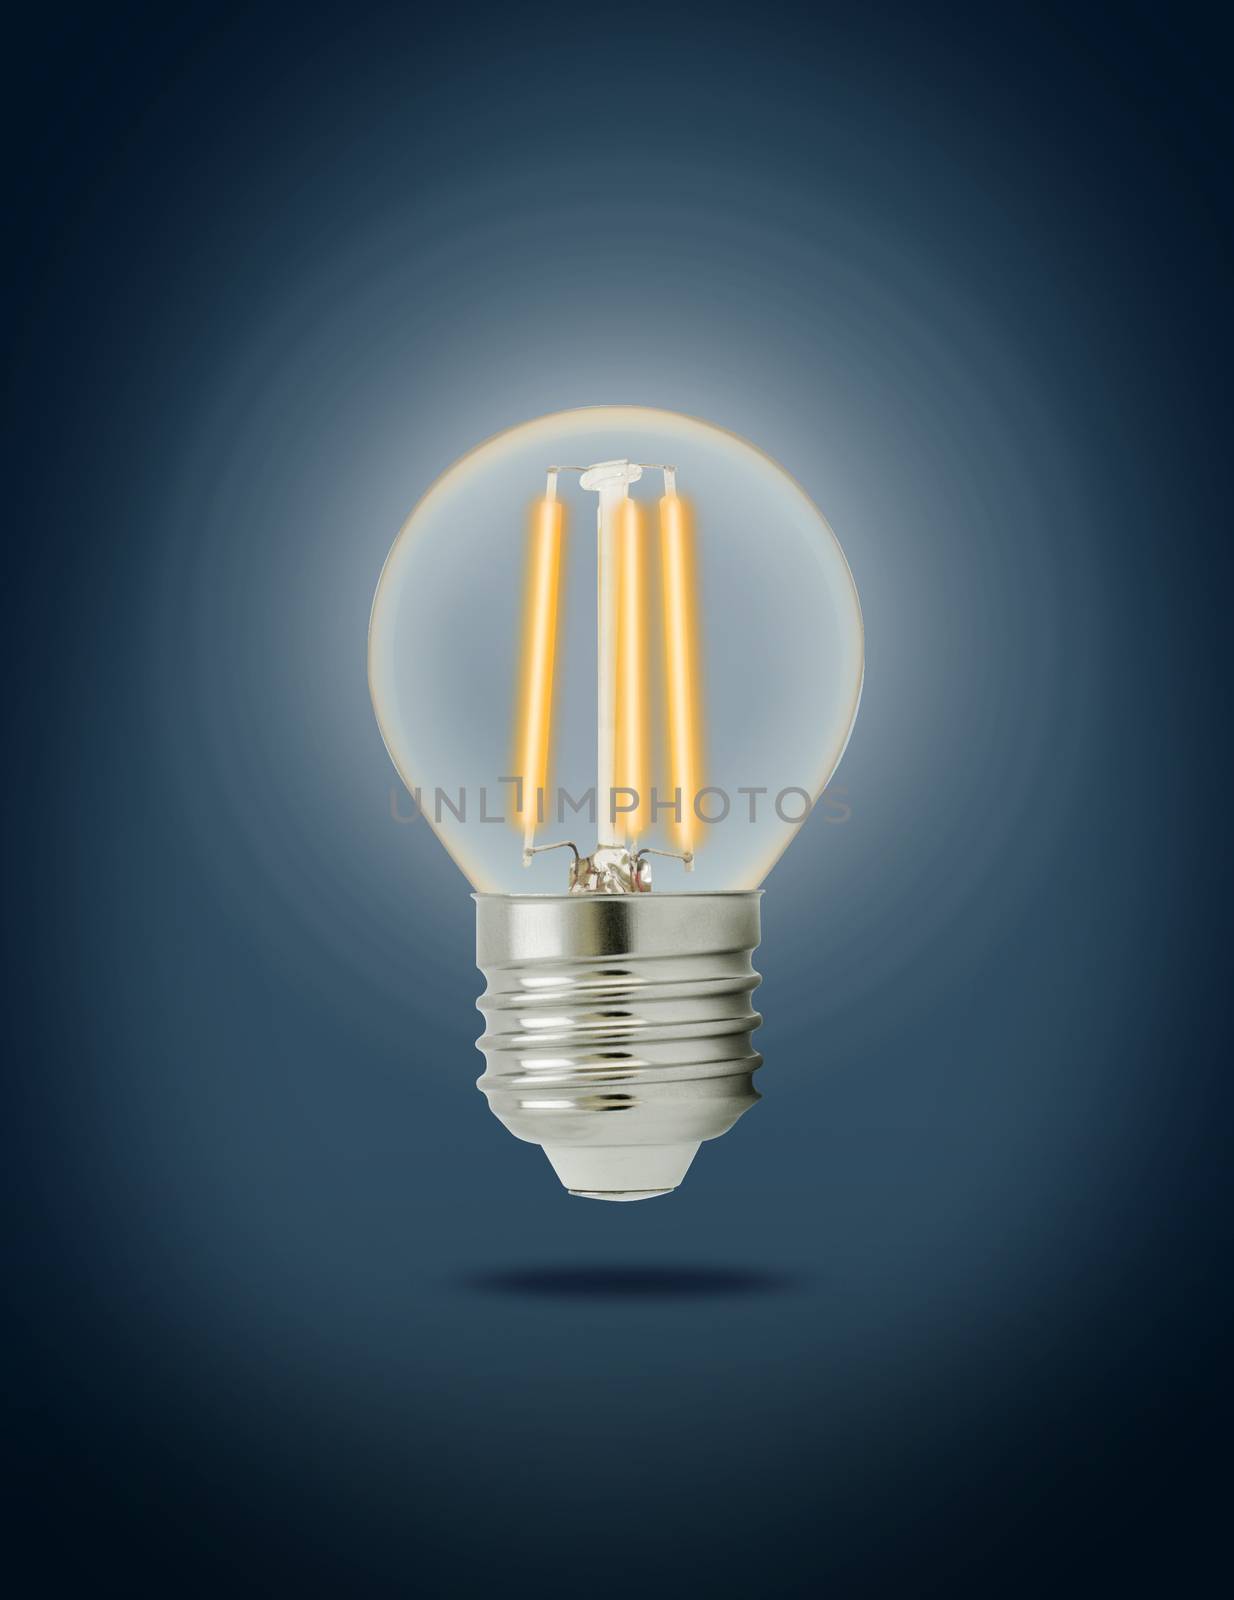 LED filament light bulb (E27). With clipping path